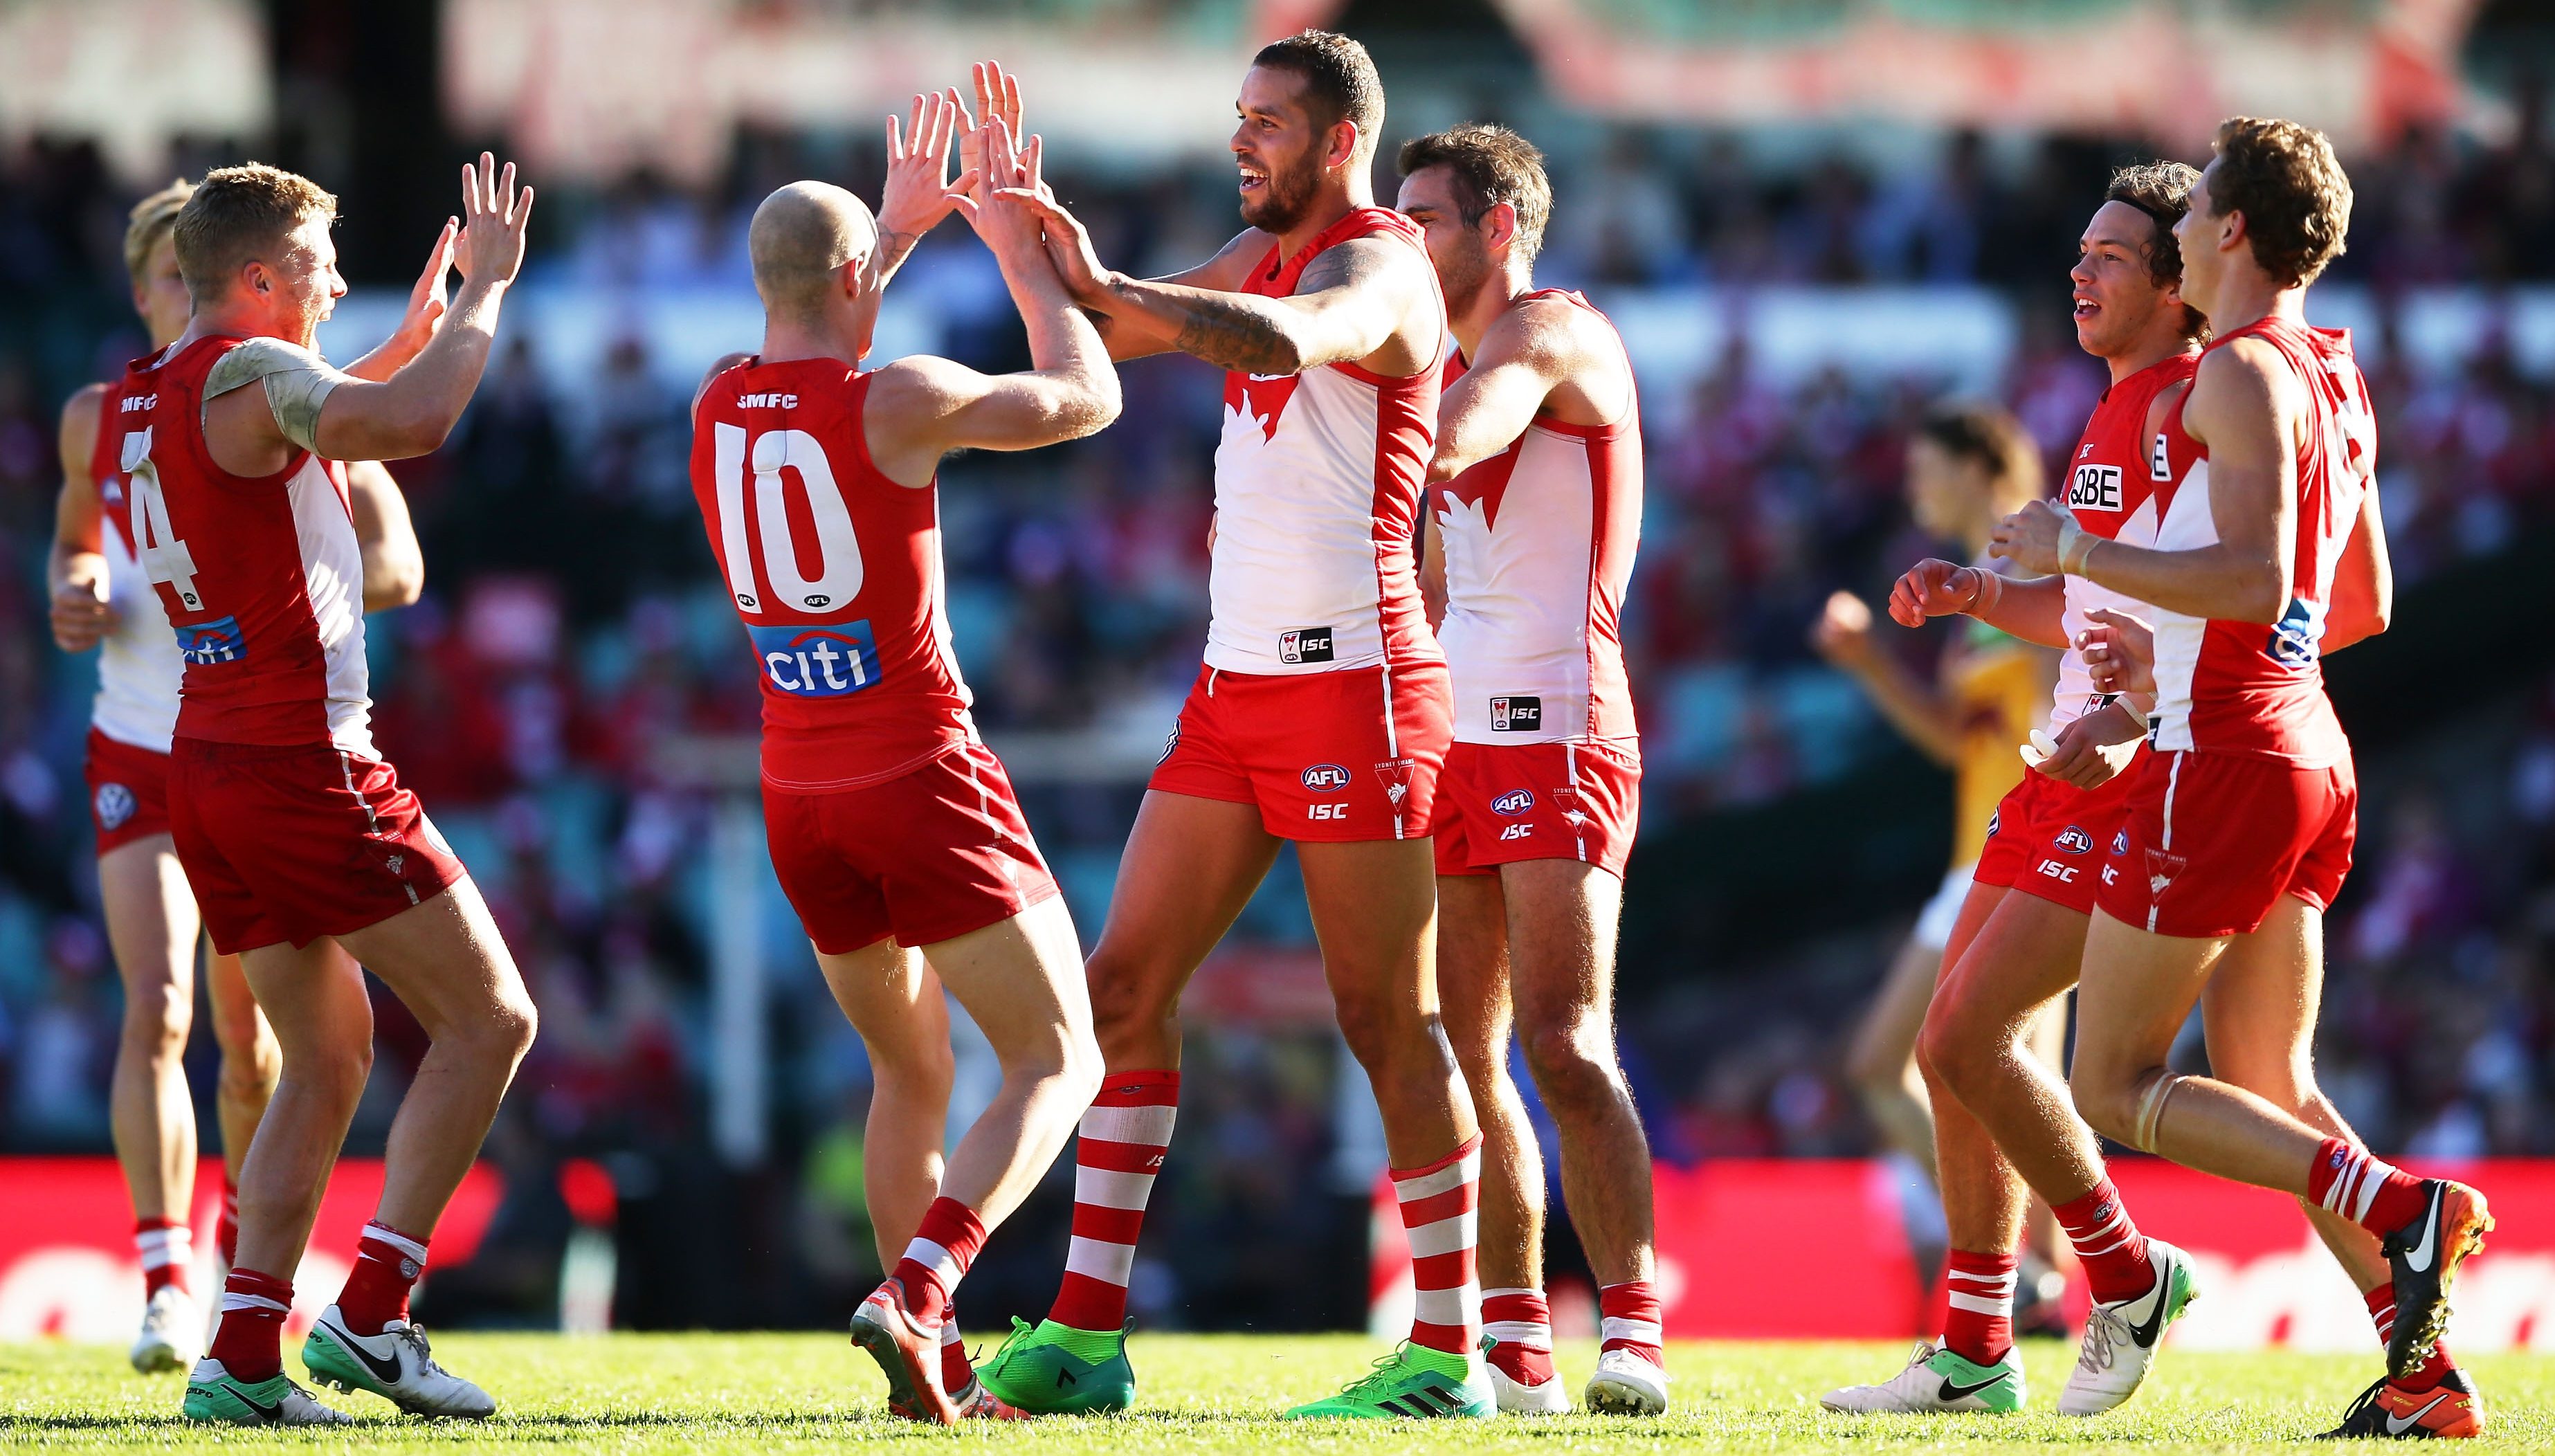 Win 1 of 5 double passes to the Sydney Swans AFL Pride Game